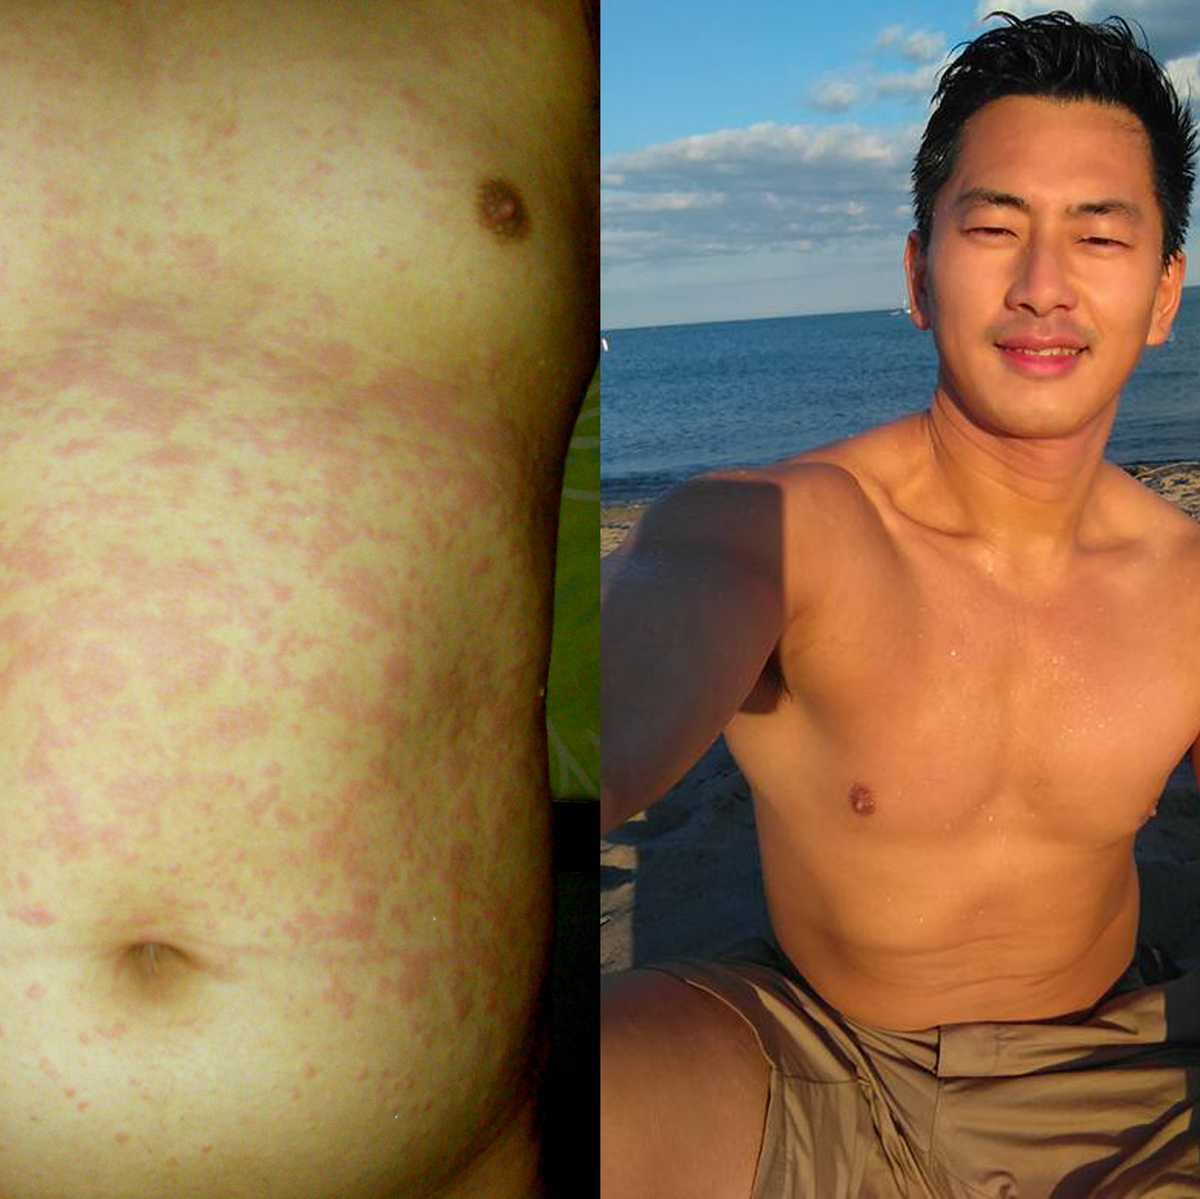 A before and after image of Kevan Kwok, creator of The Hypoallergenic Diet and founder of Aether Health. The image shows his skin before and after The Hypoallergenic Diet